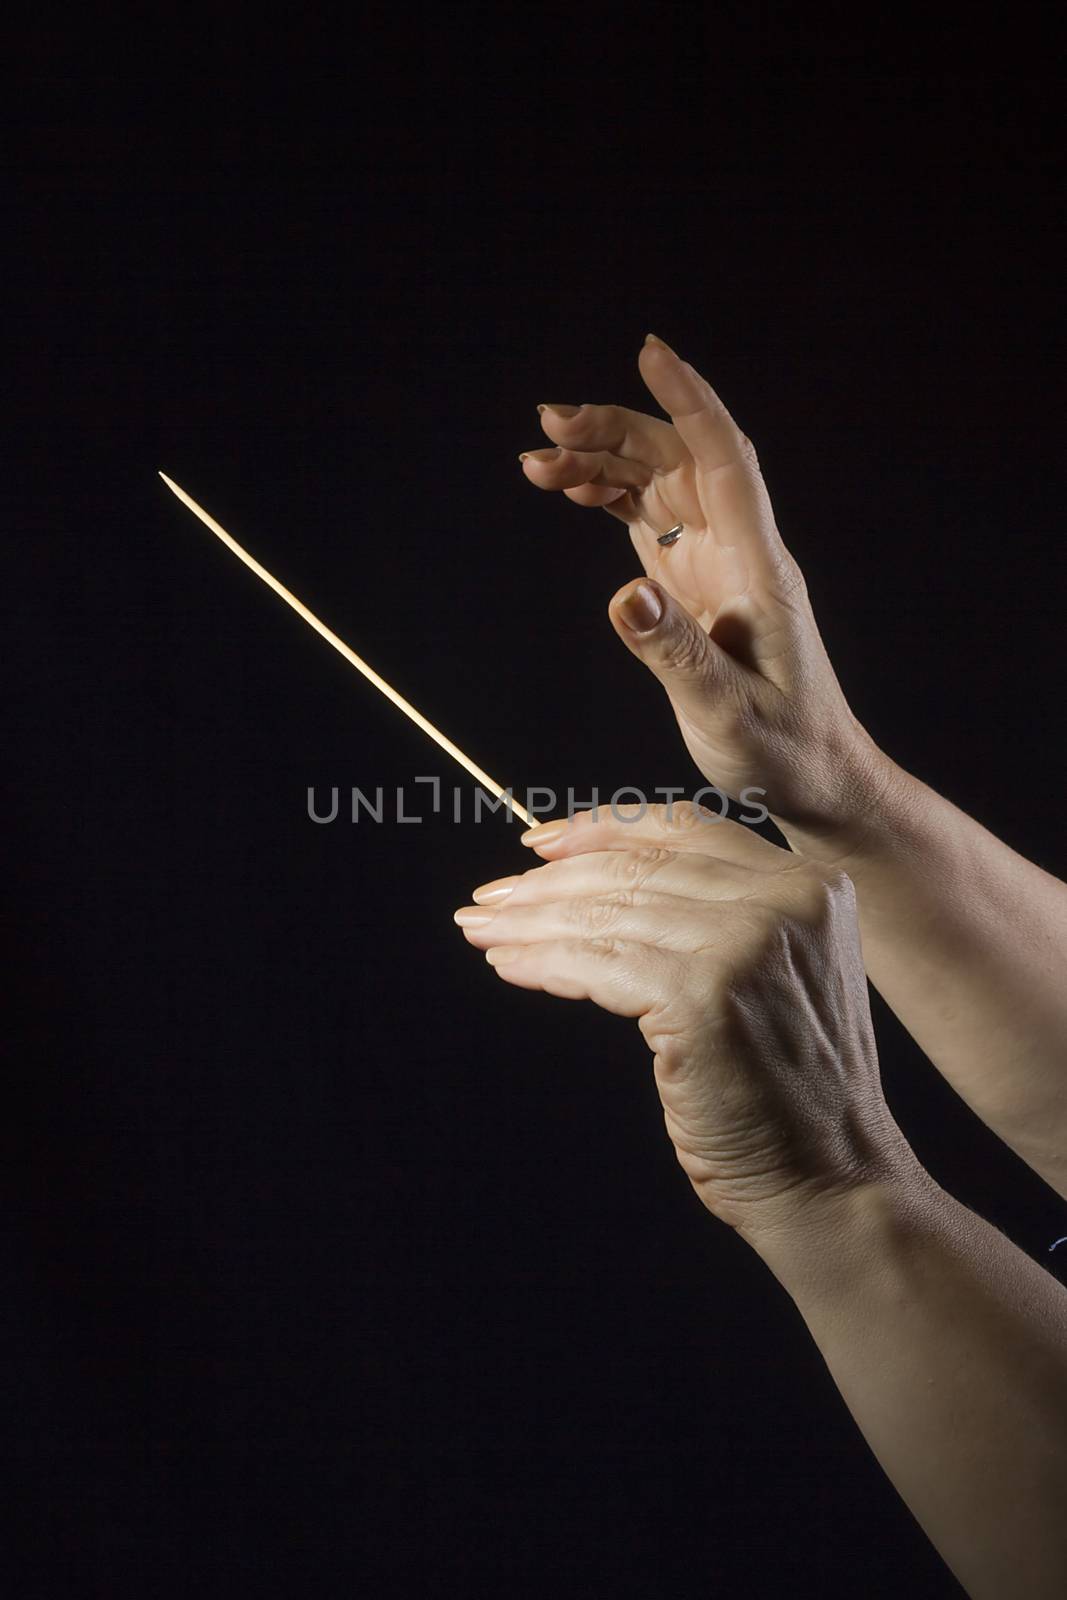 Female hands of an orchestra conductor on a black background